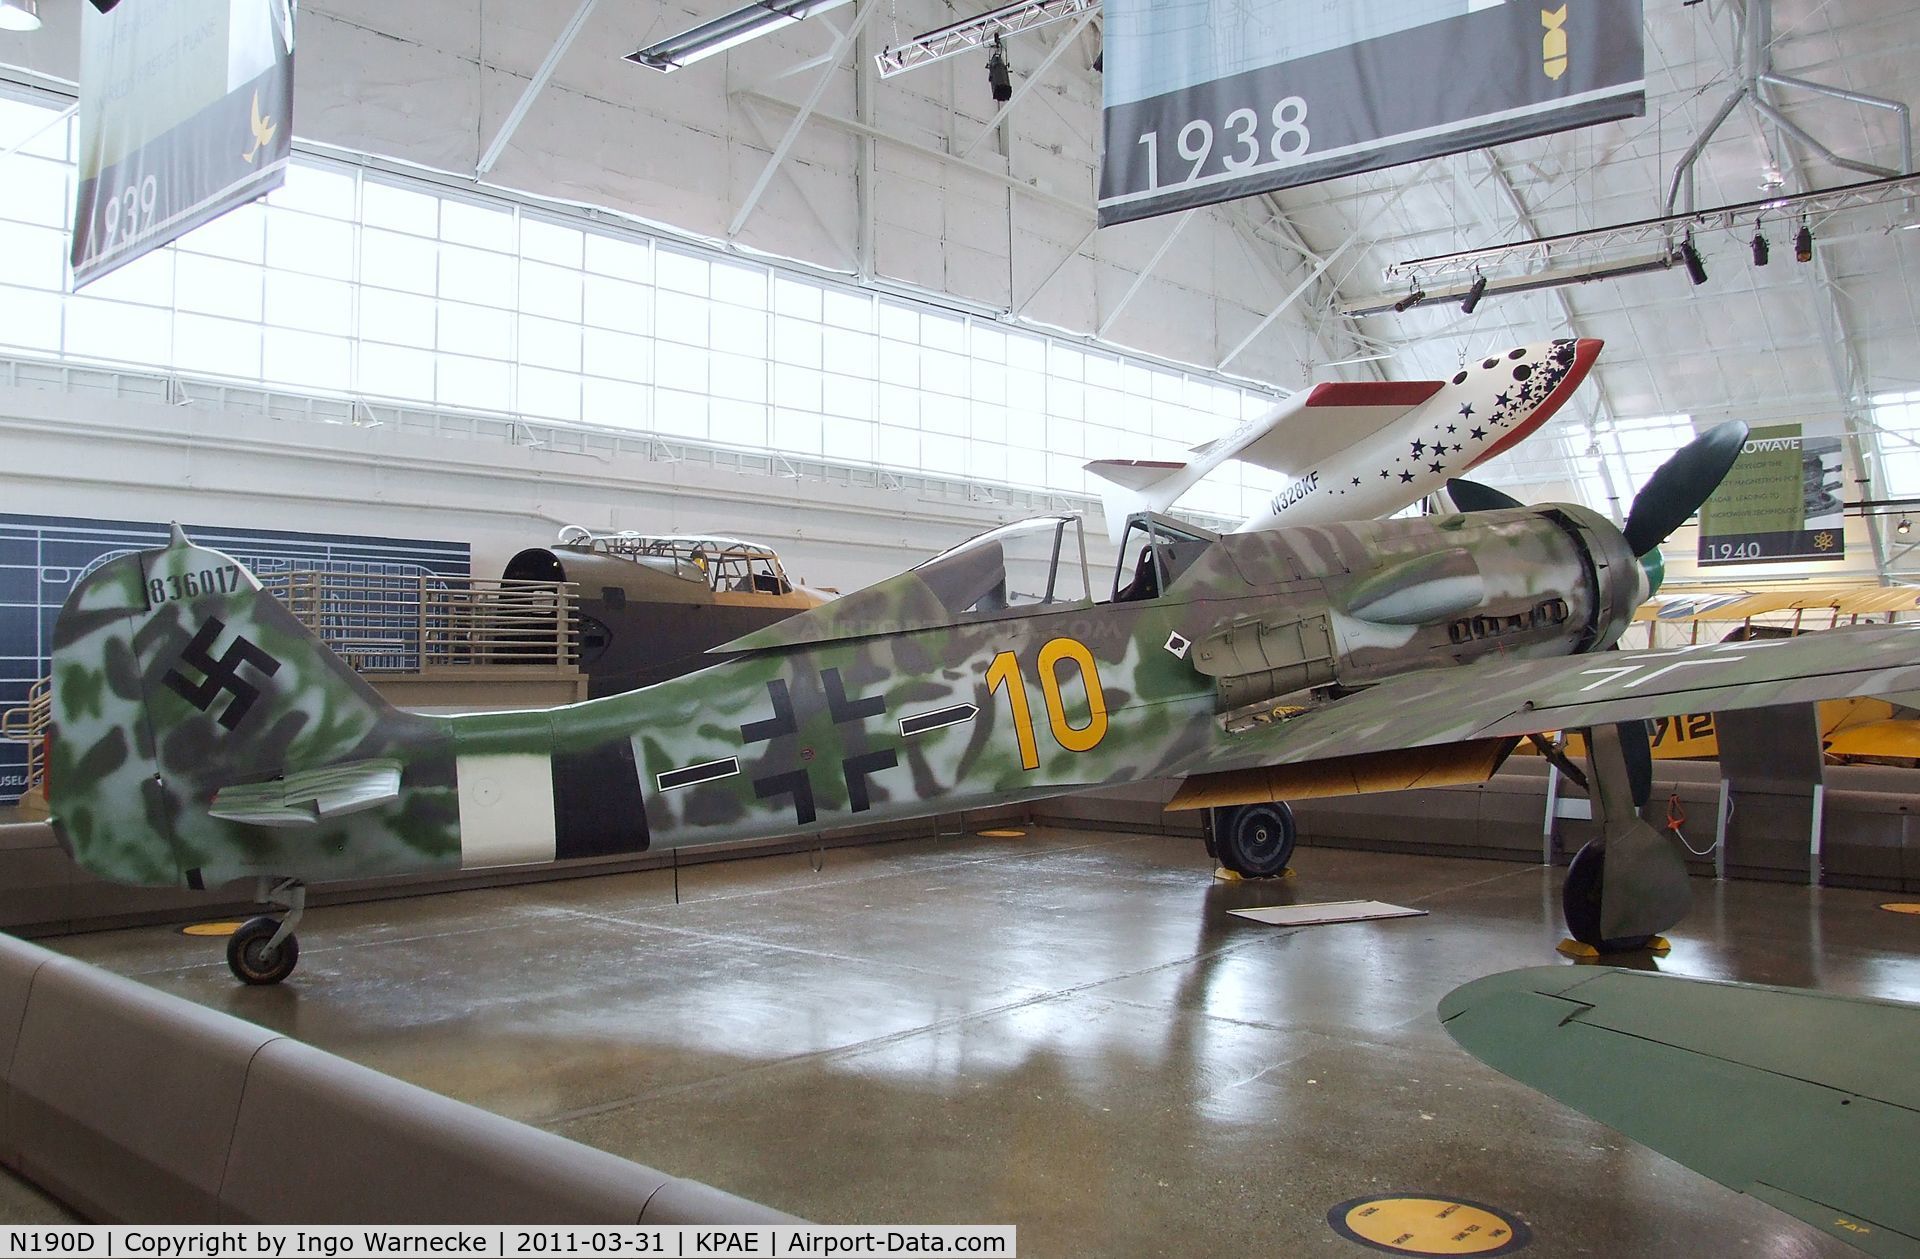 N190D, Focke-Wulf Fw-190D-13/R11 C/N 836017, Focke-Wulf Fw 190D-13 at the Flying Heritage Collection, Everett WA